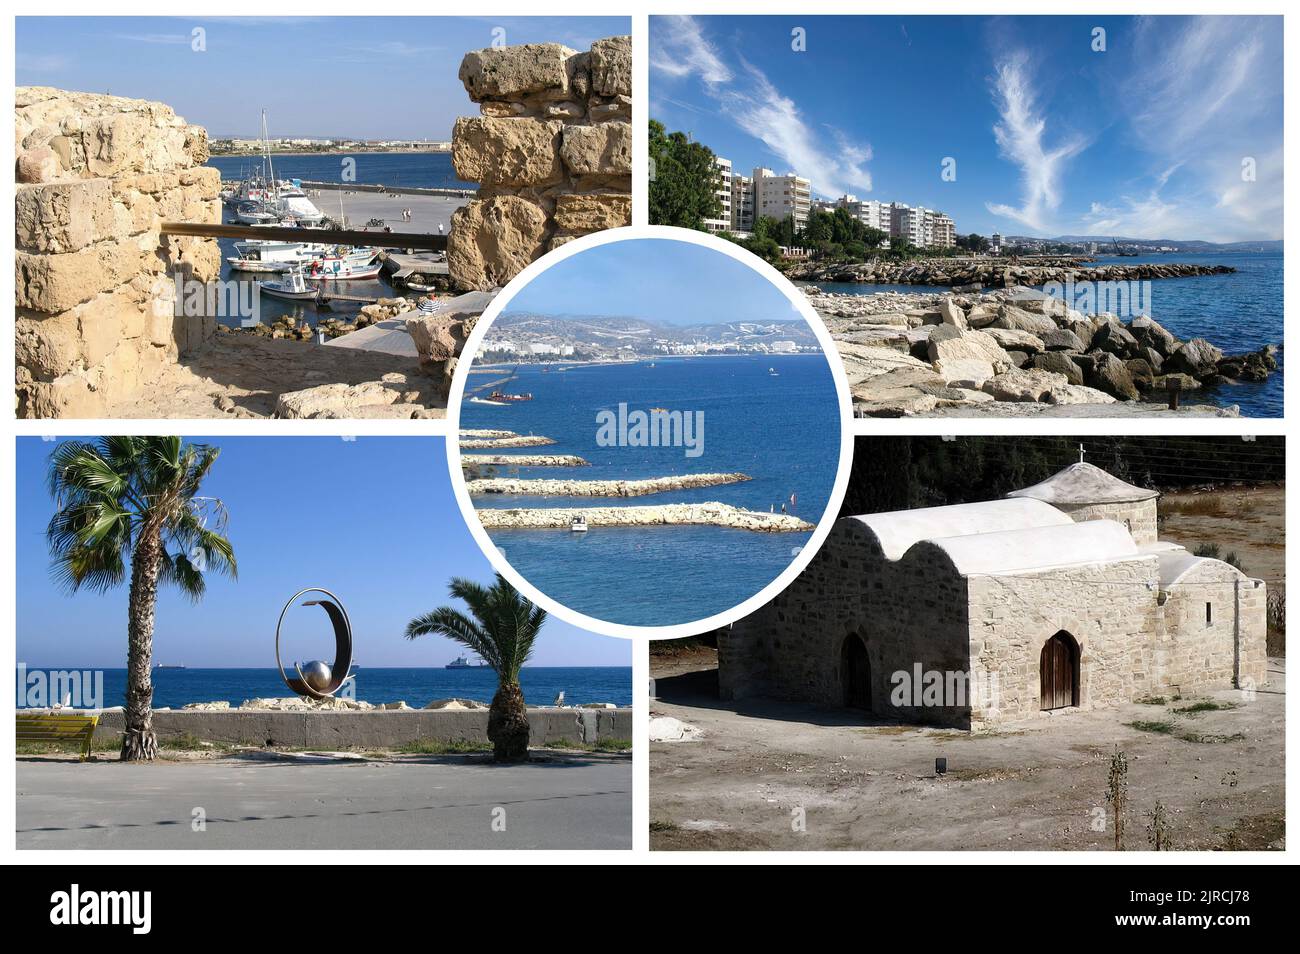 The island of Cyprus is one of the most beautiful islands in the Mediterranean Sea (1) Stock Photo